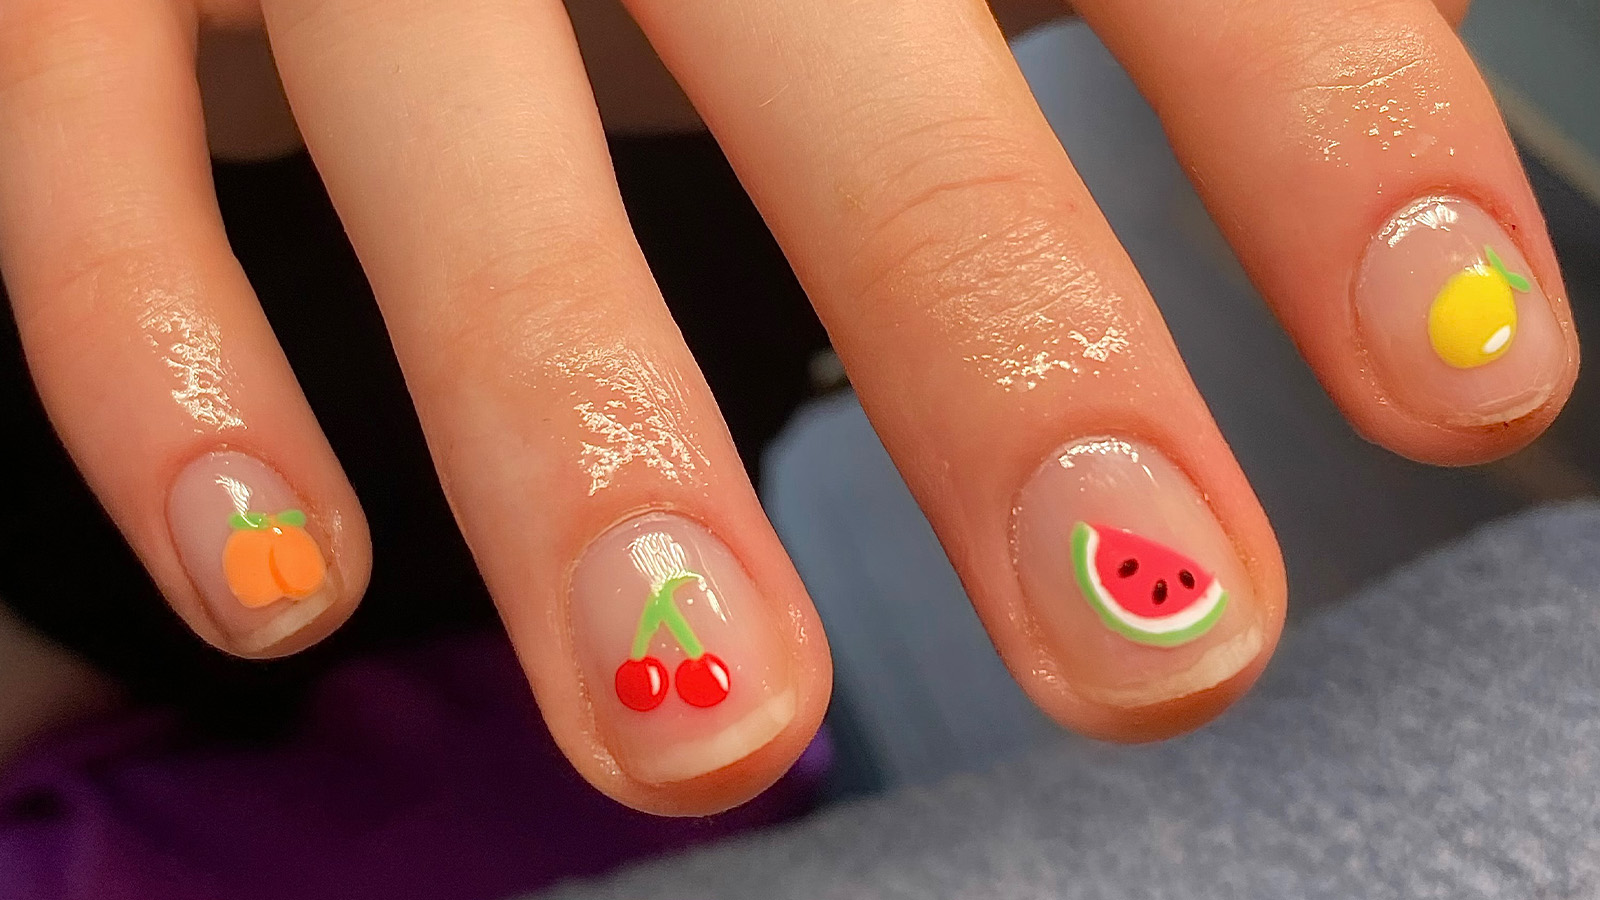 03 05 22 FRUIT NAILS EDITED ARTICLE